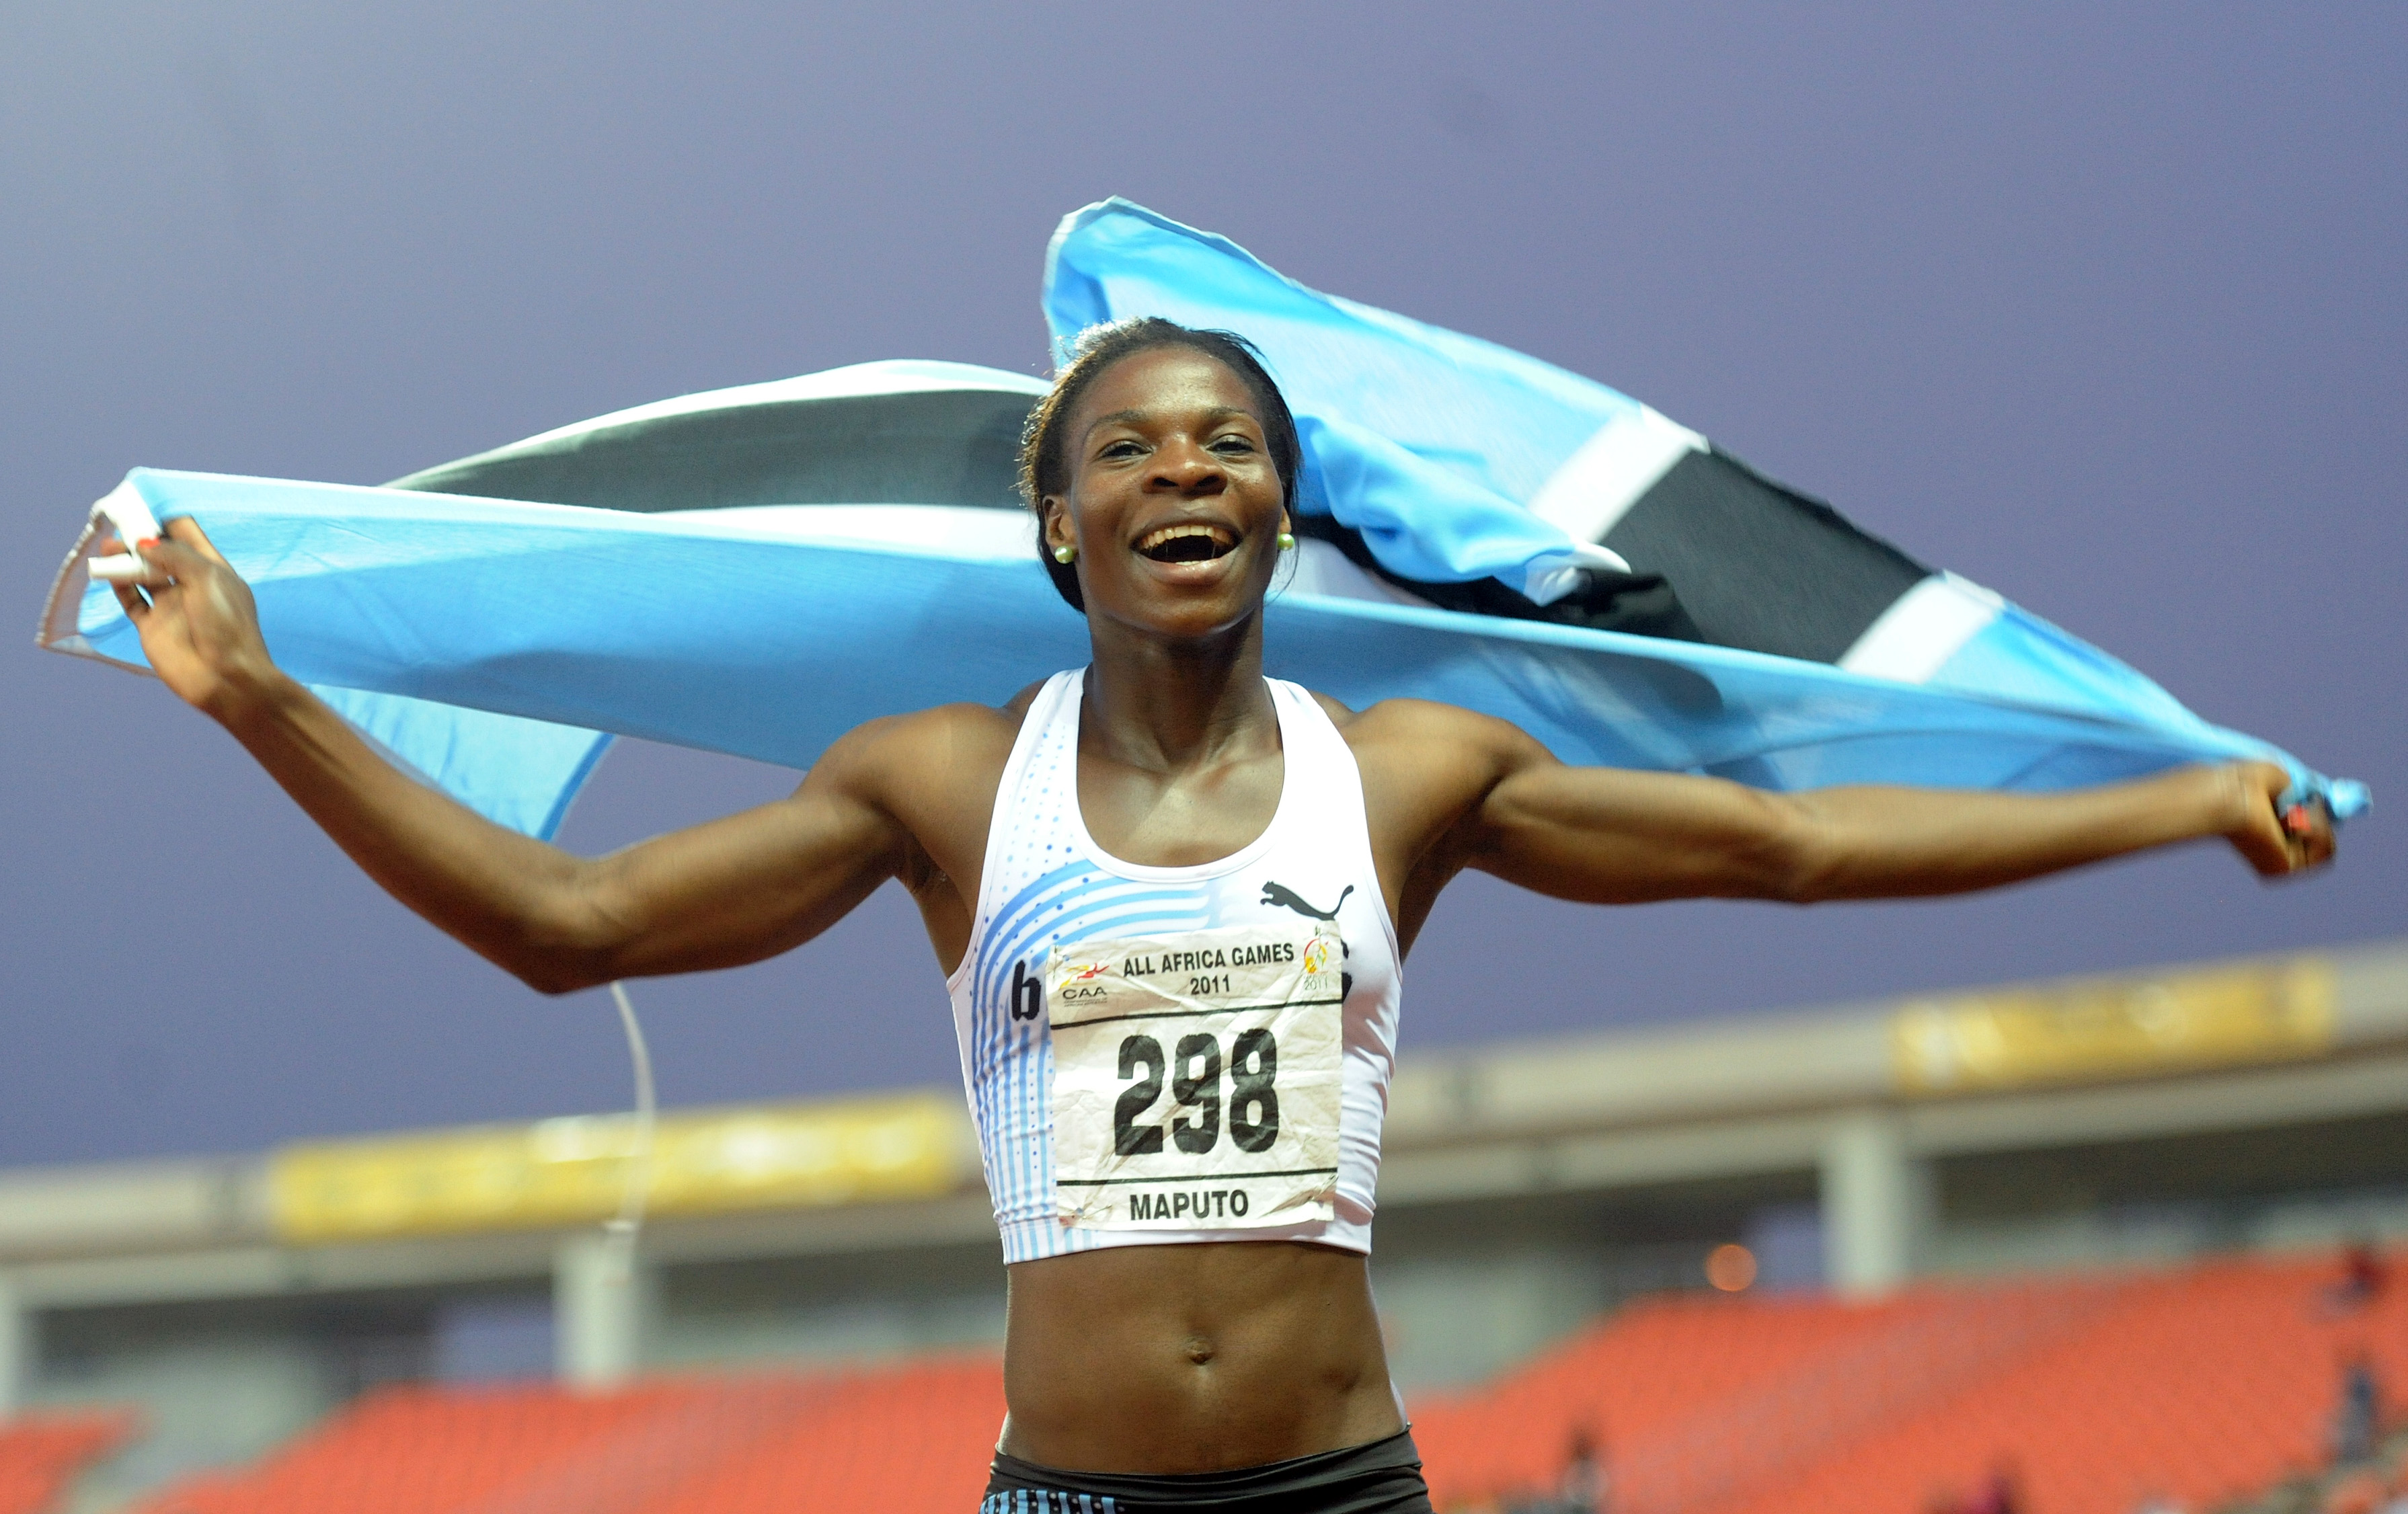 Amantle Montsho celebrates her 2011 All-African Games triumph in Maputo. (Photo Credit: www.bsnc.co.bw)